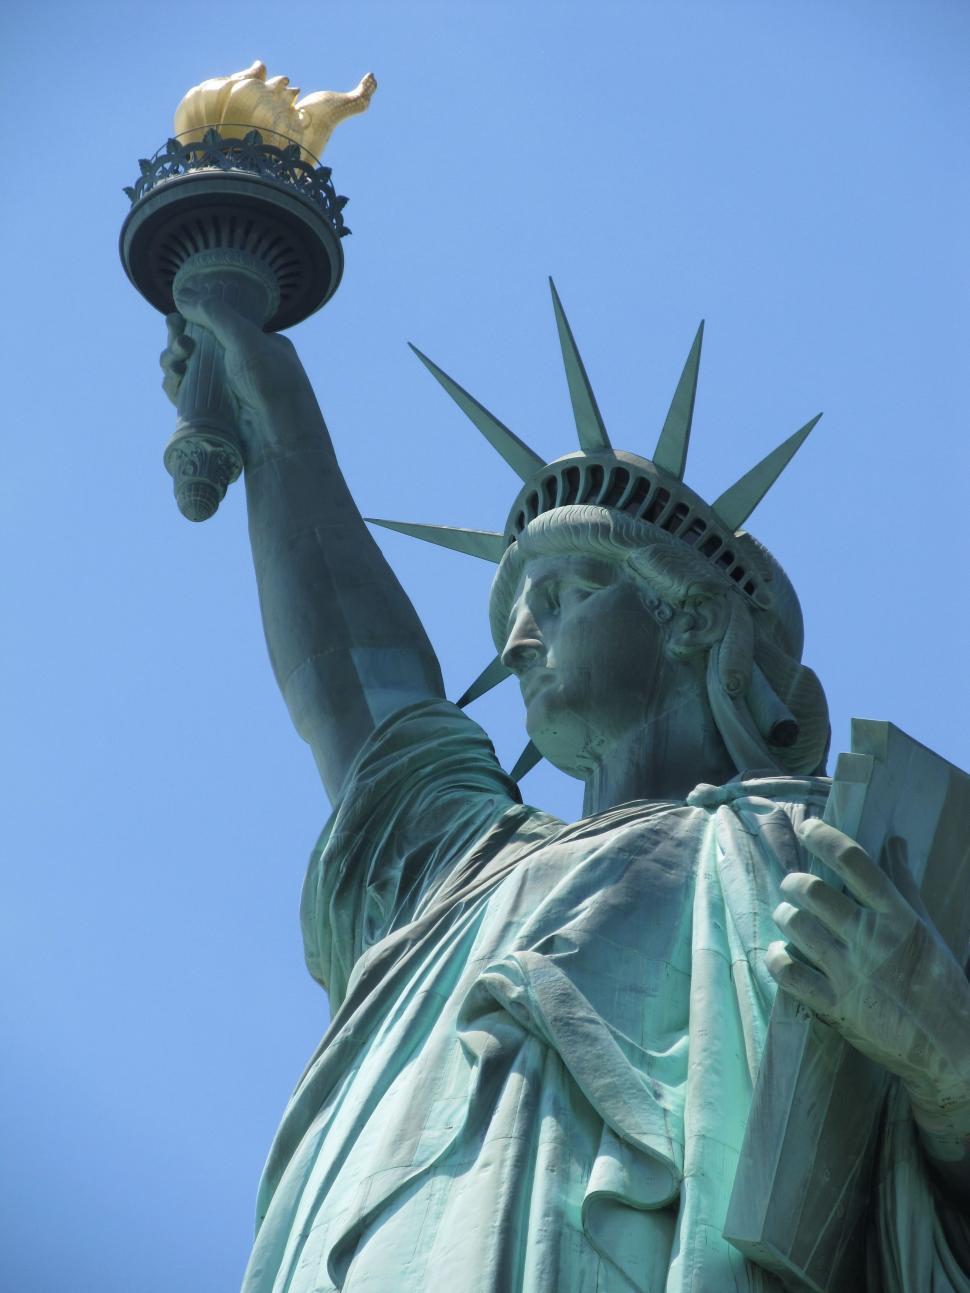 Free Image of The Statue of Liberty Holding a Book 